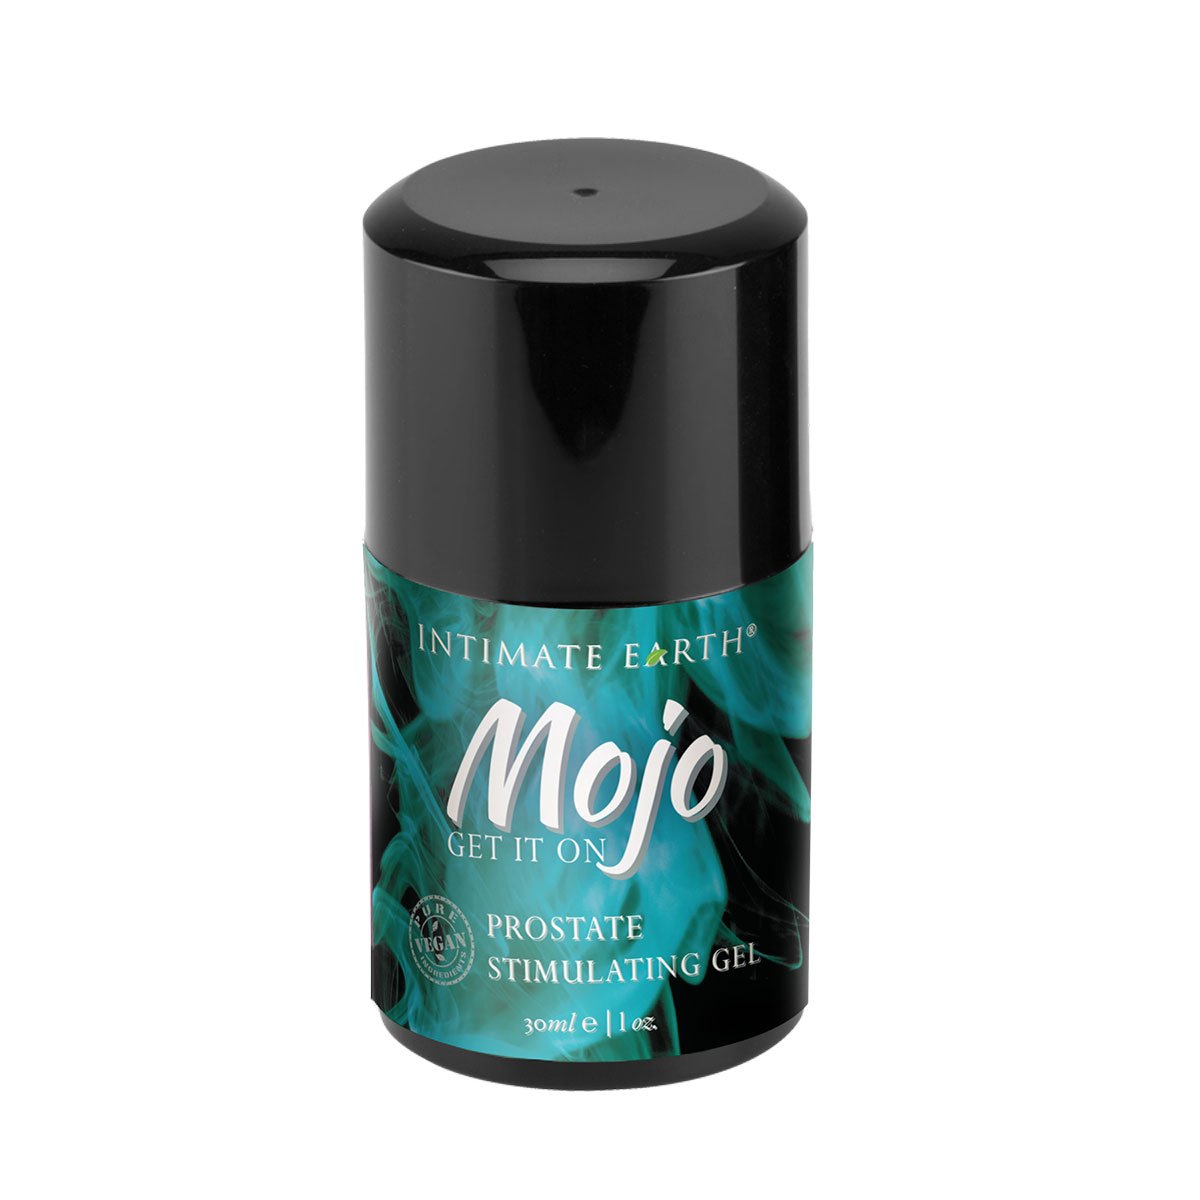 Intimate Earth MOJO Prostate Stimulating Gel 1oz-30ml - Buy At Luxury Toy X - Free 3-Day Shipping